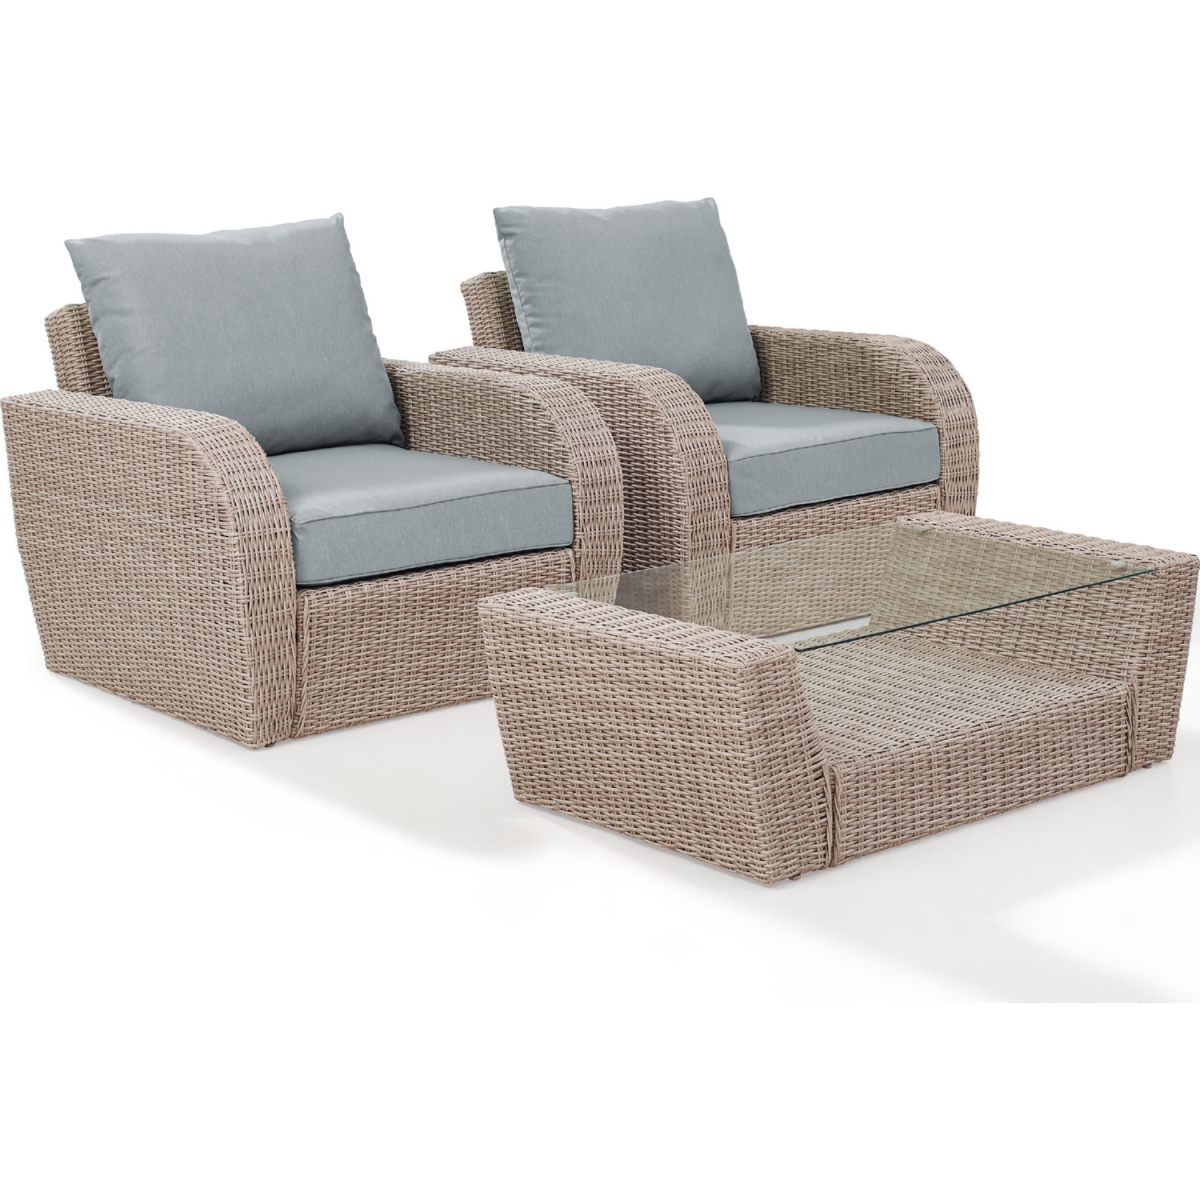 Ko70135wh-mi 3 Piece St. Augustine Outdoor Wicker Seating Set With Mist Cushion - Two Outdoor Wicker Chairs, Coffee Table